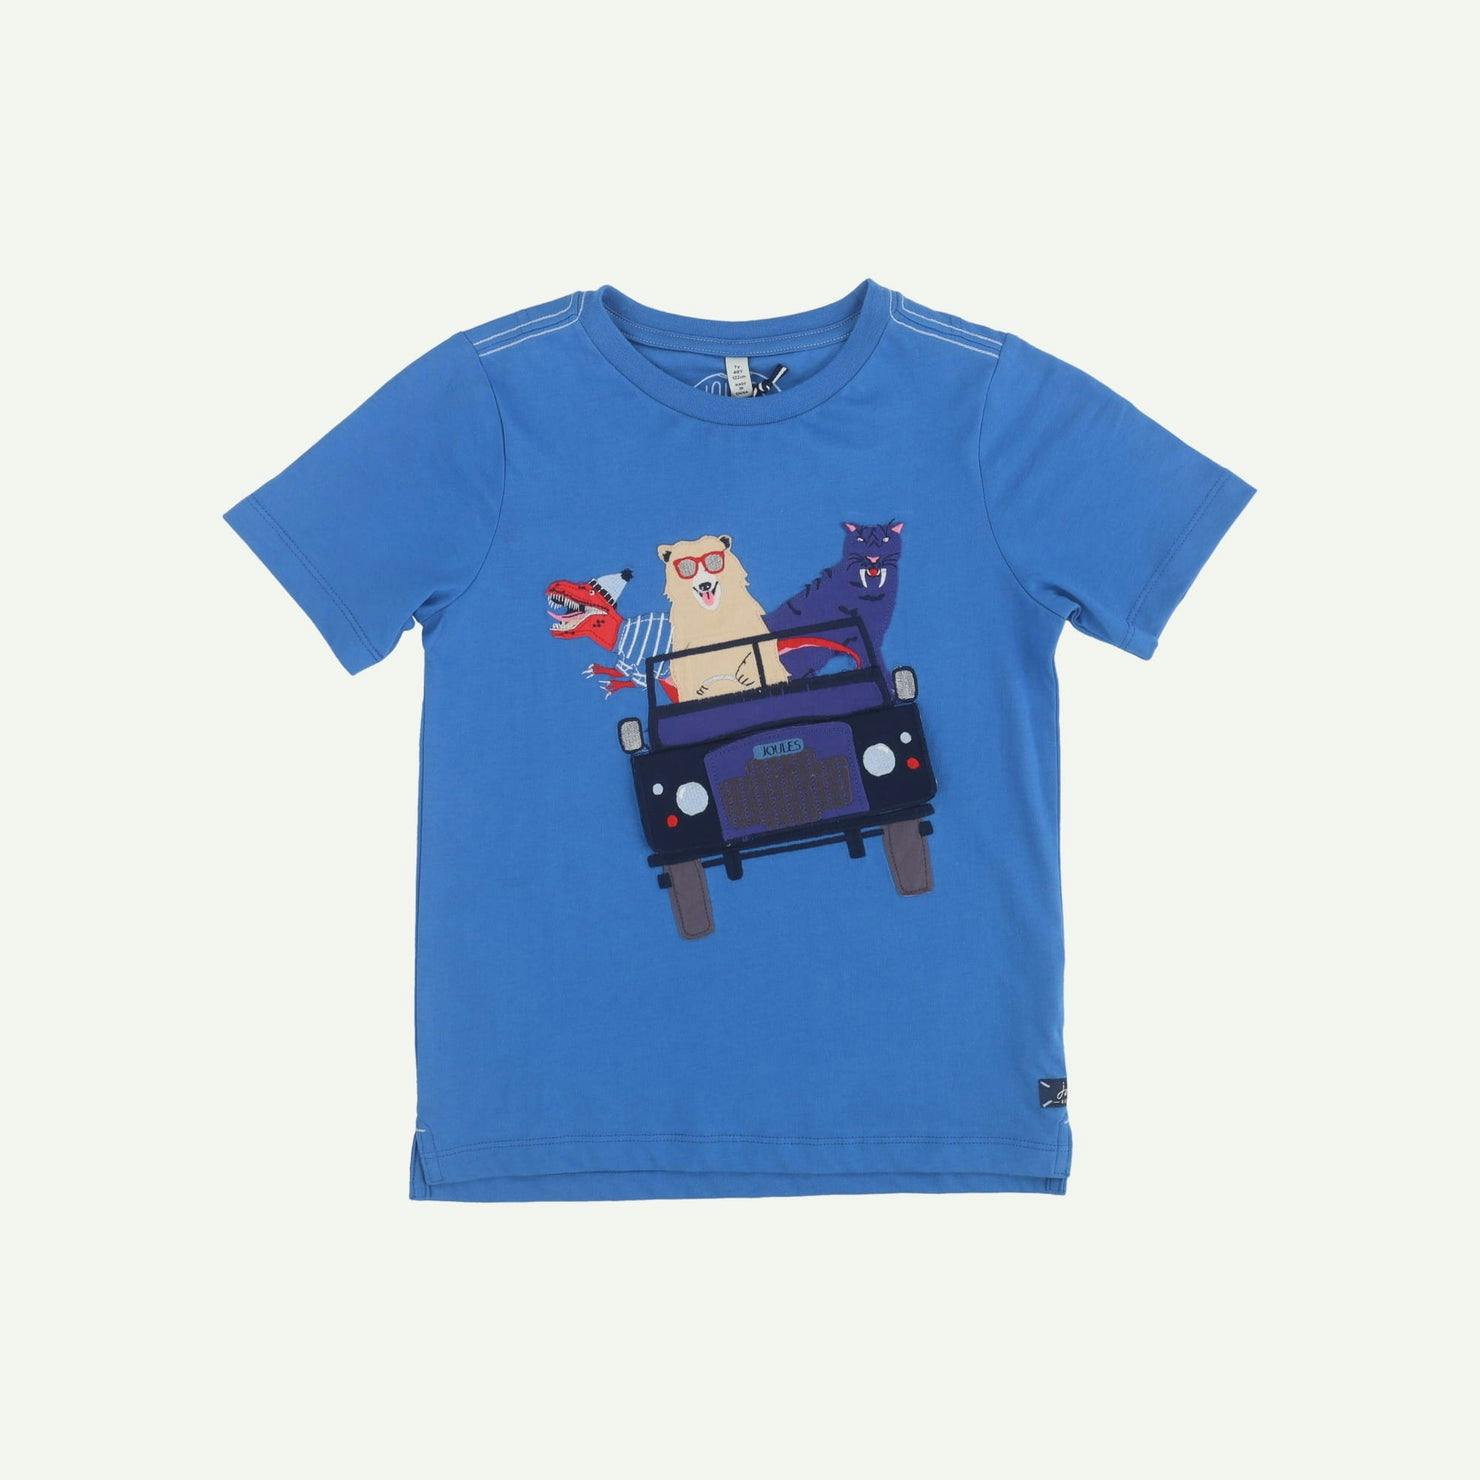 Joules As new Blue T-shirt